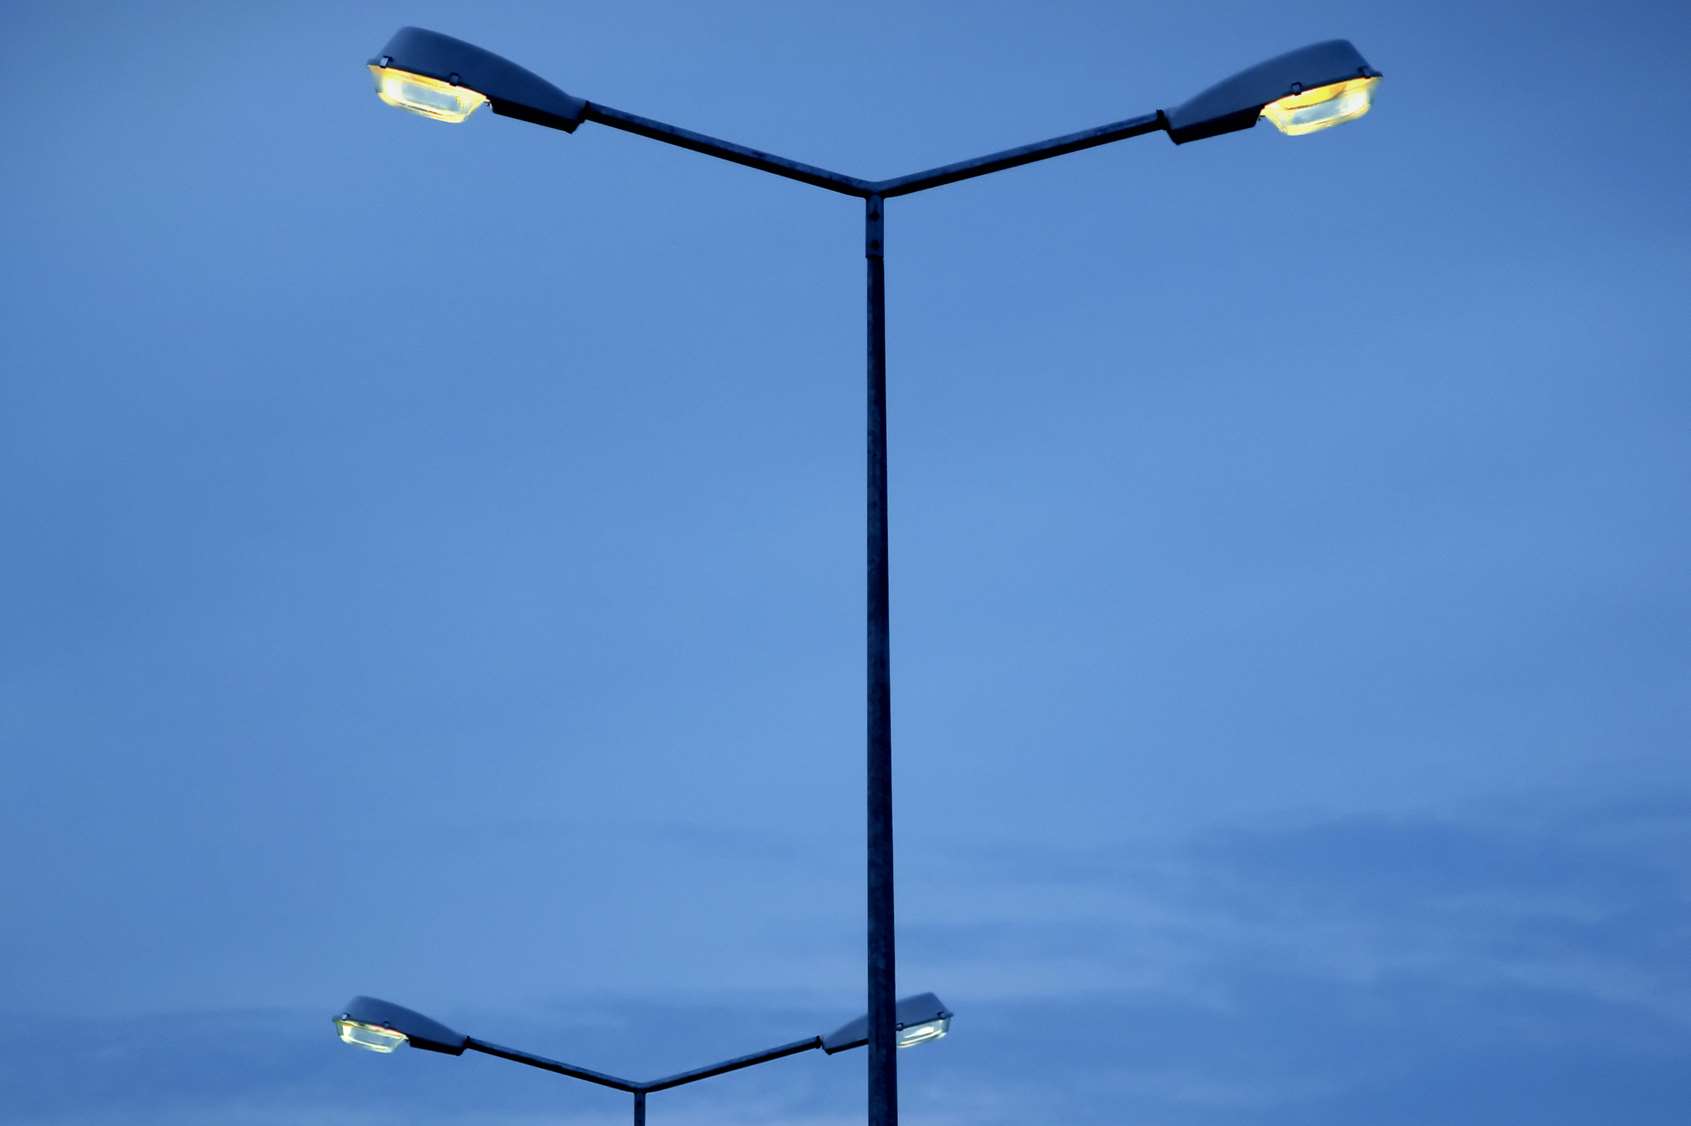 Kent County Council switched off street lights in some areas to save money